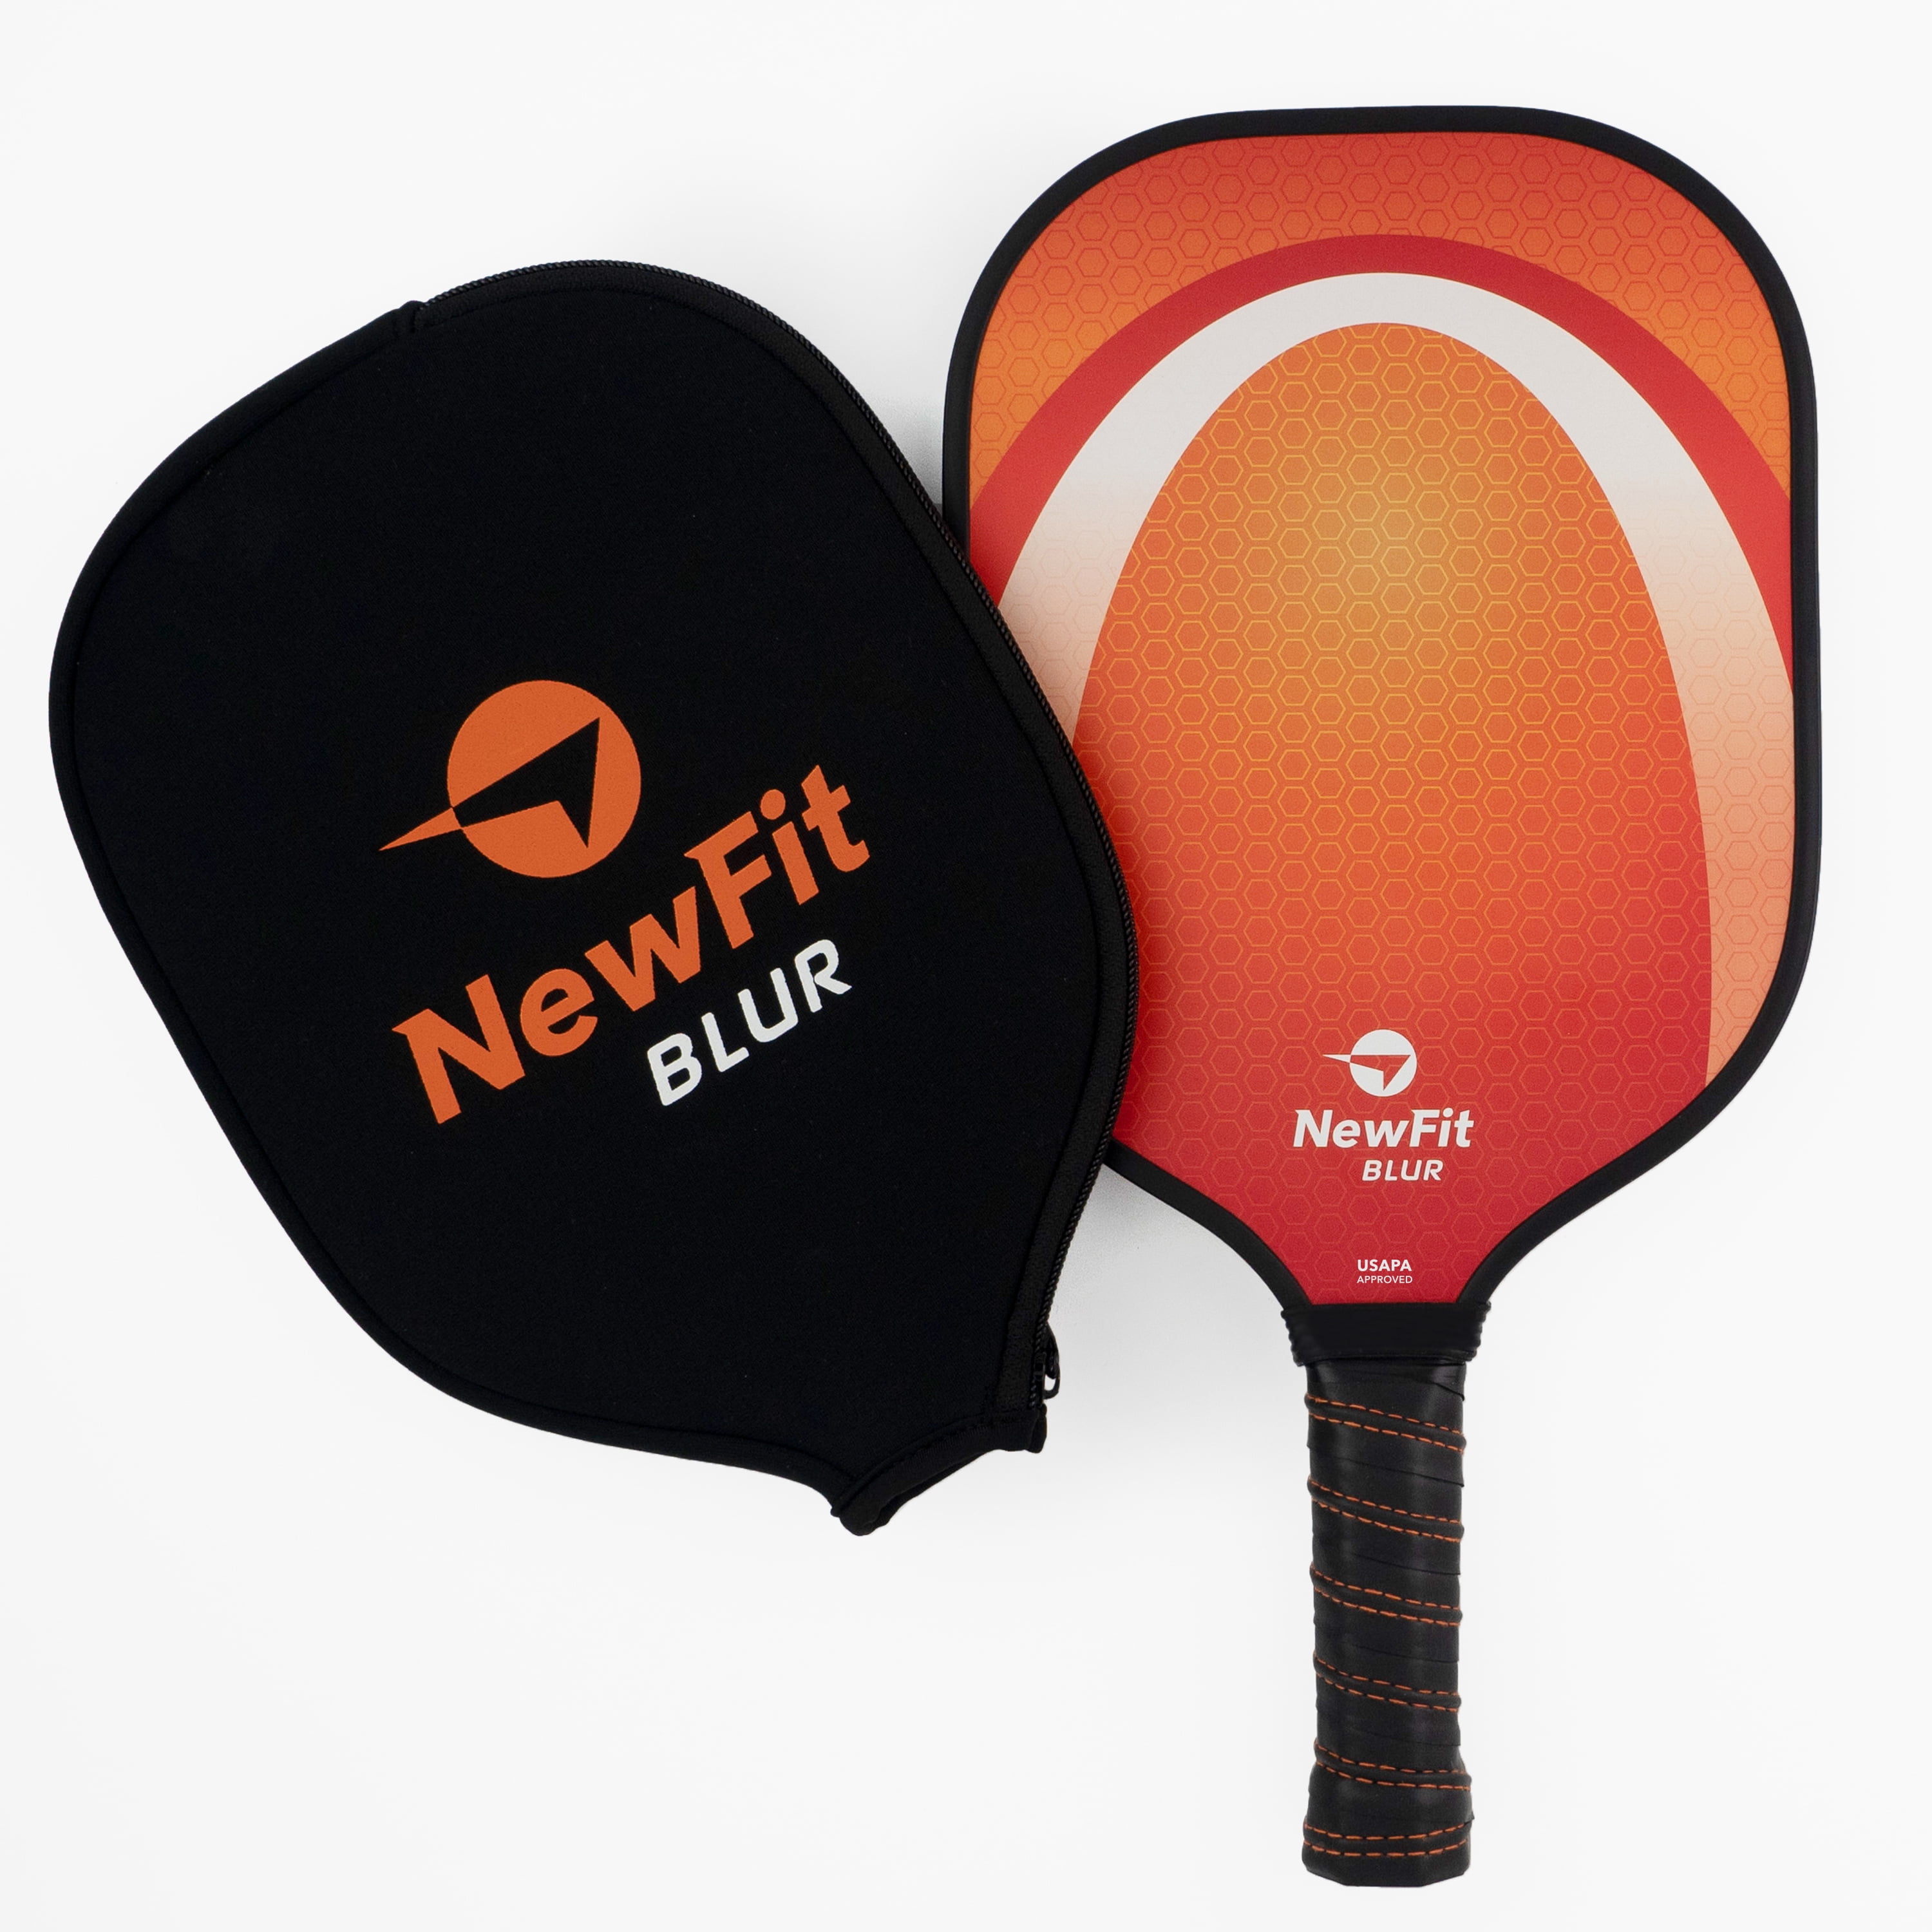 USAPA Approved Graphite Face & Polymer Core for a Quiet & Light Racket NewFit Blur Pickleball Paddle 